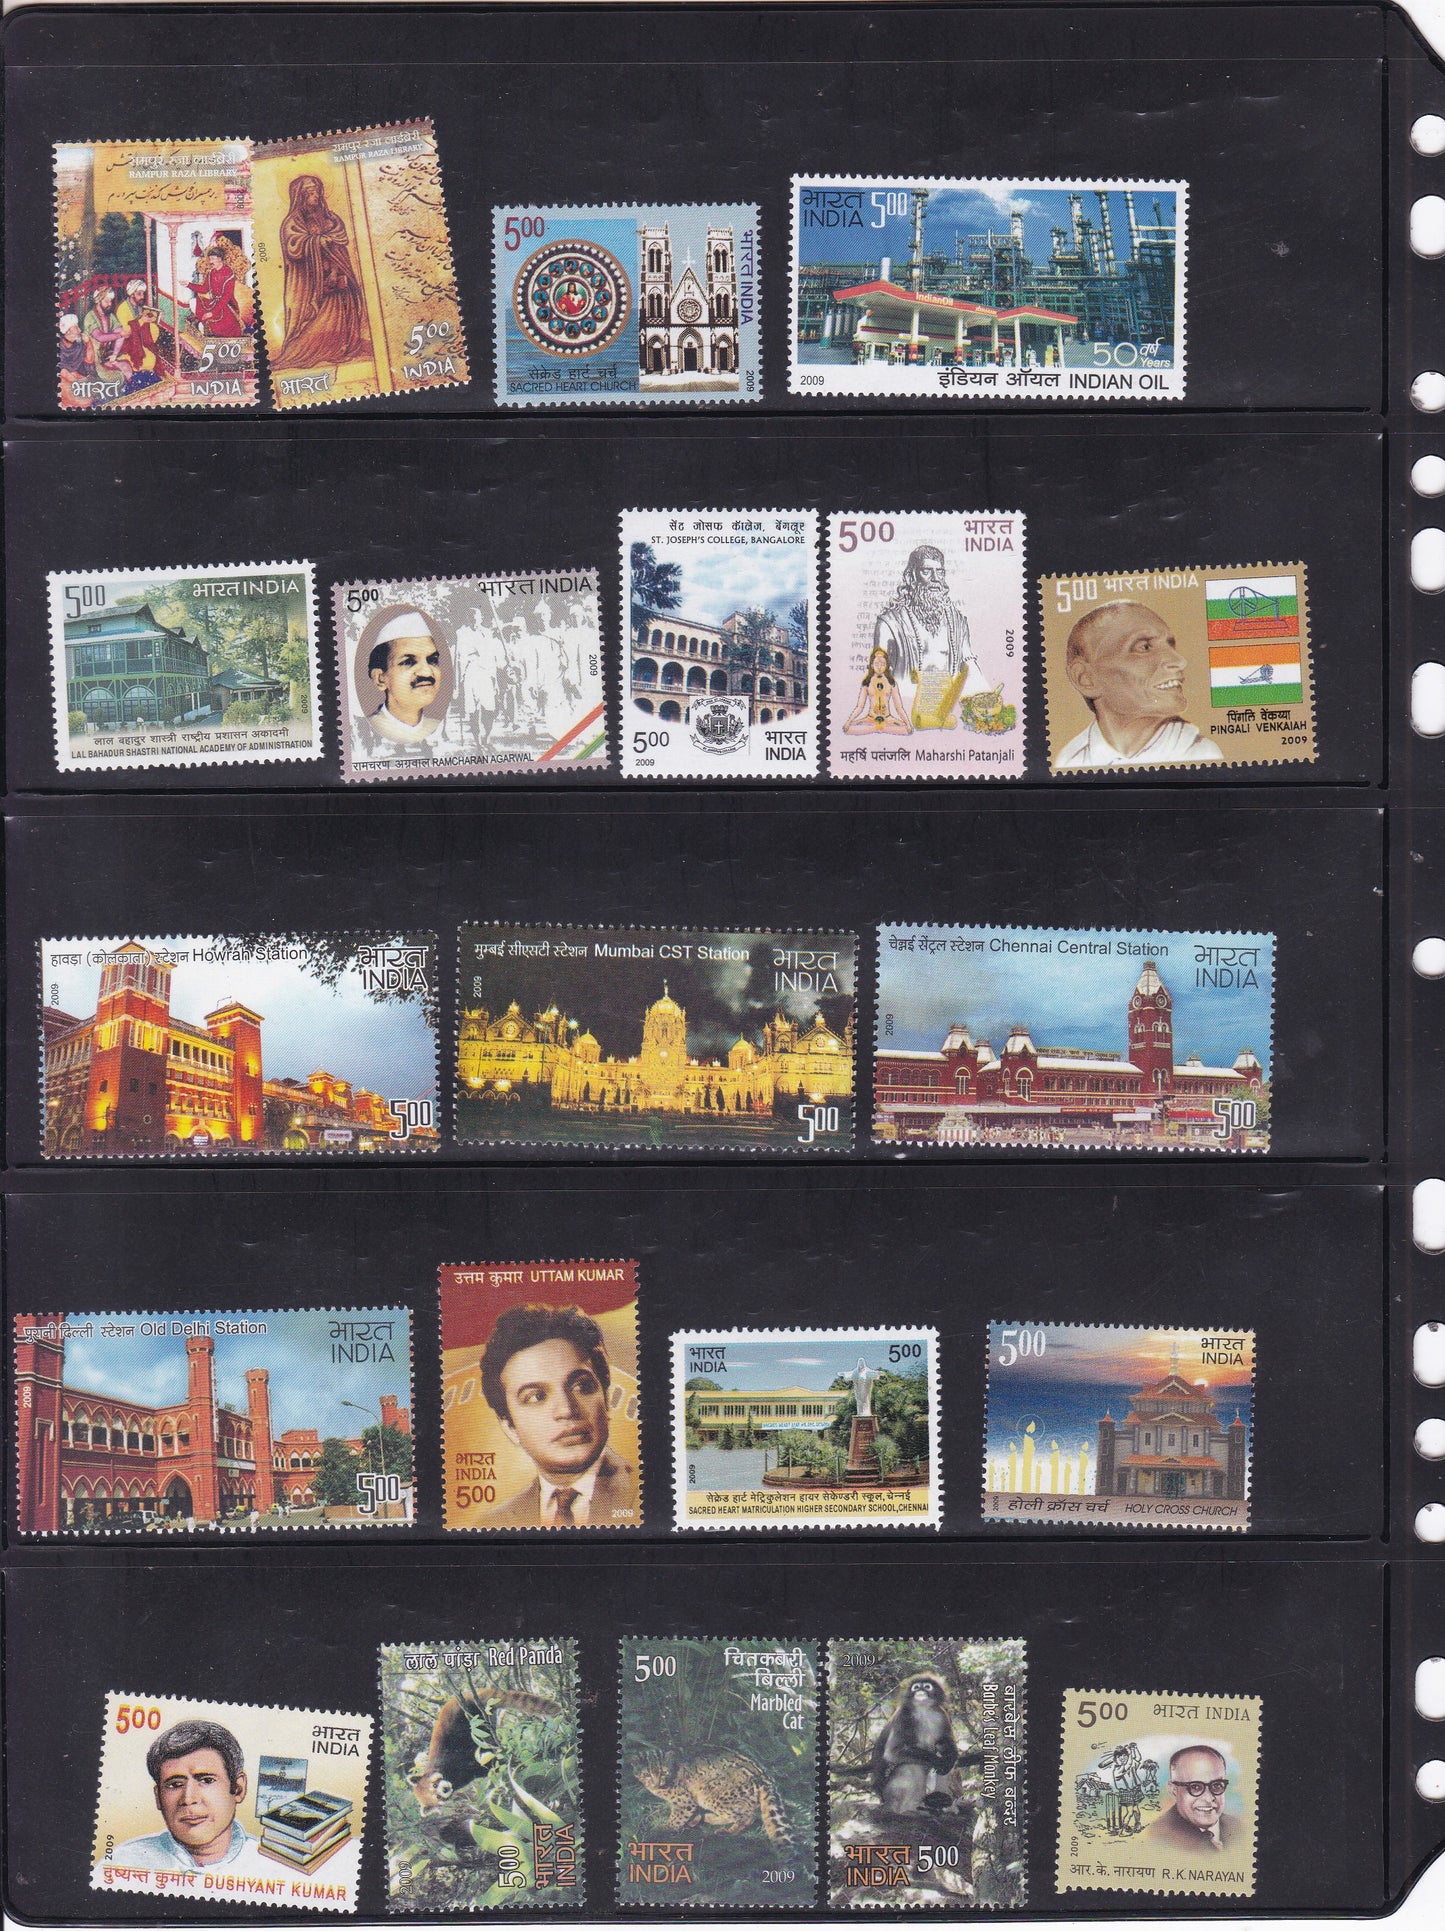 India-2009 Full Year pack MNH Stamps.